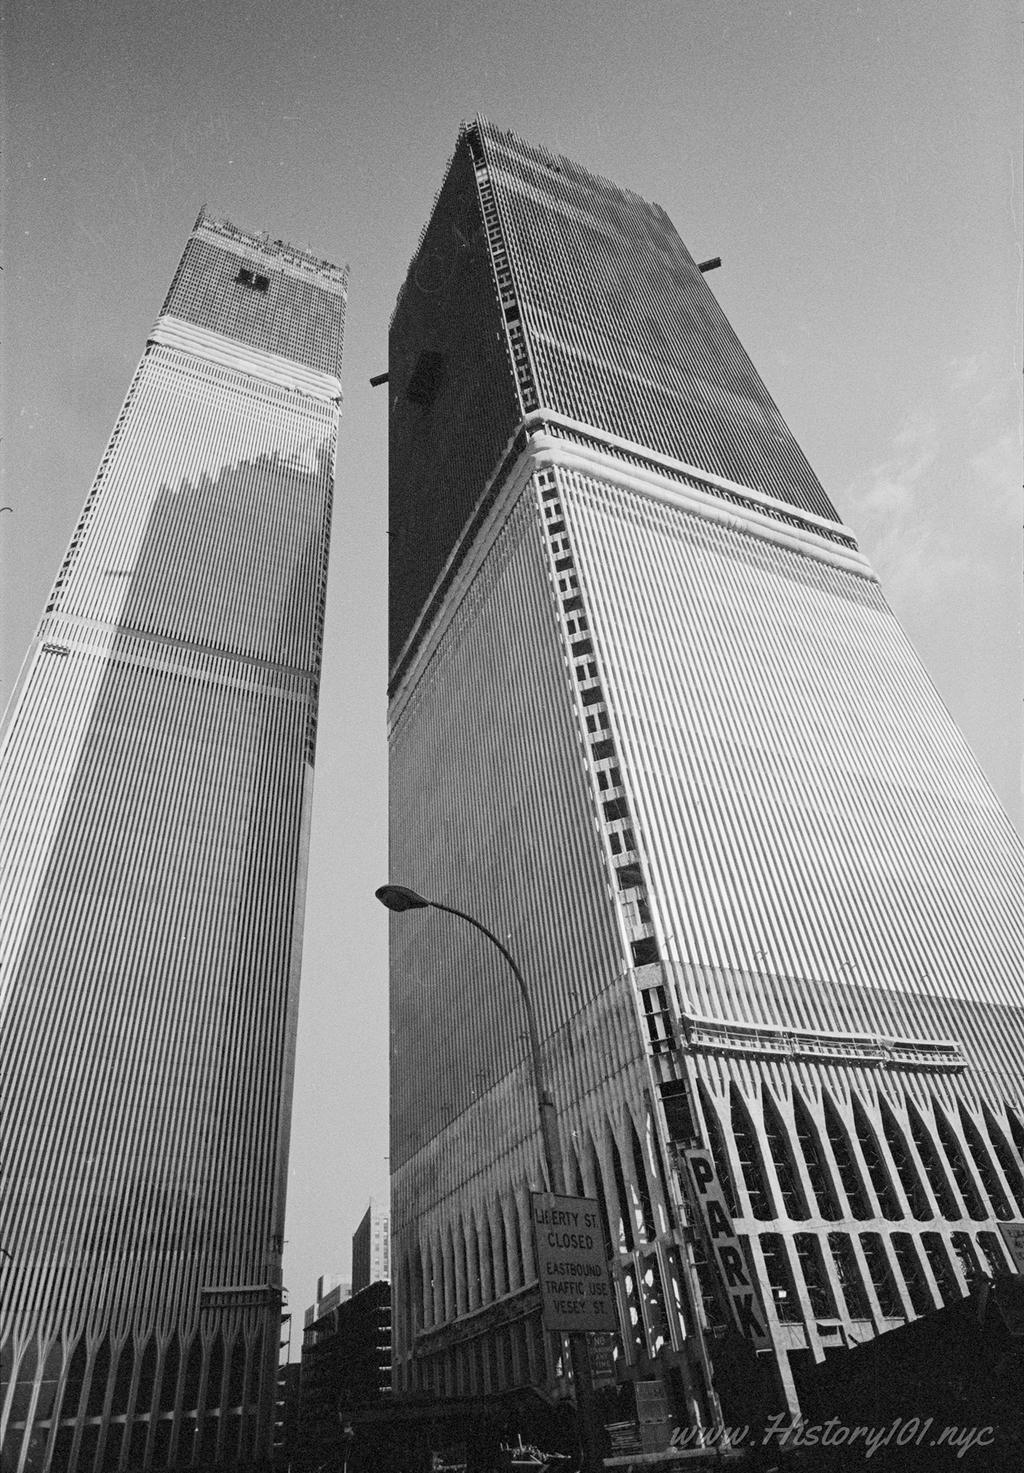 The construction of World Trade Center 1 and 2, colloquially known as the Twin Towers.